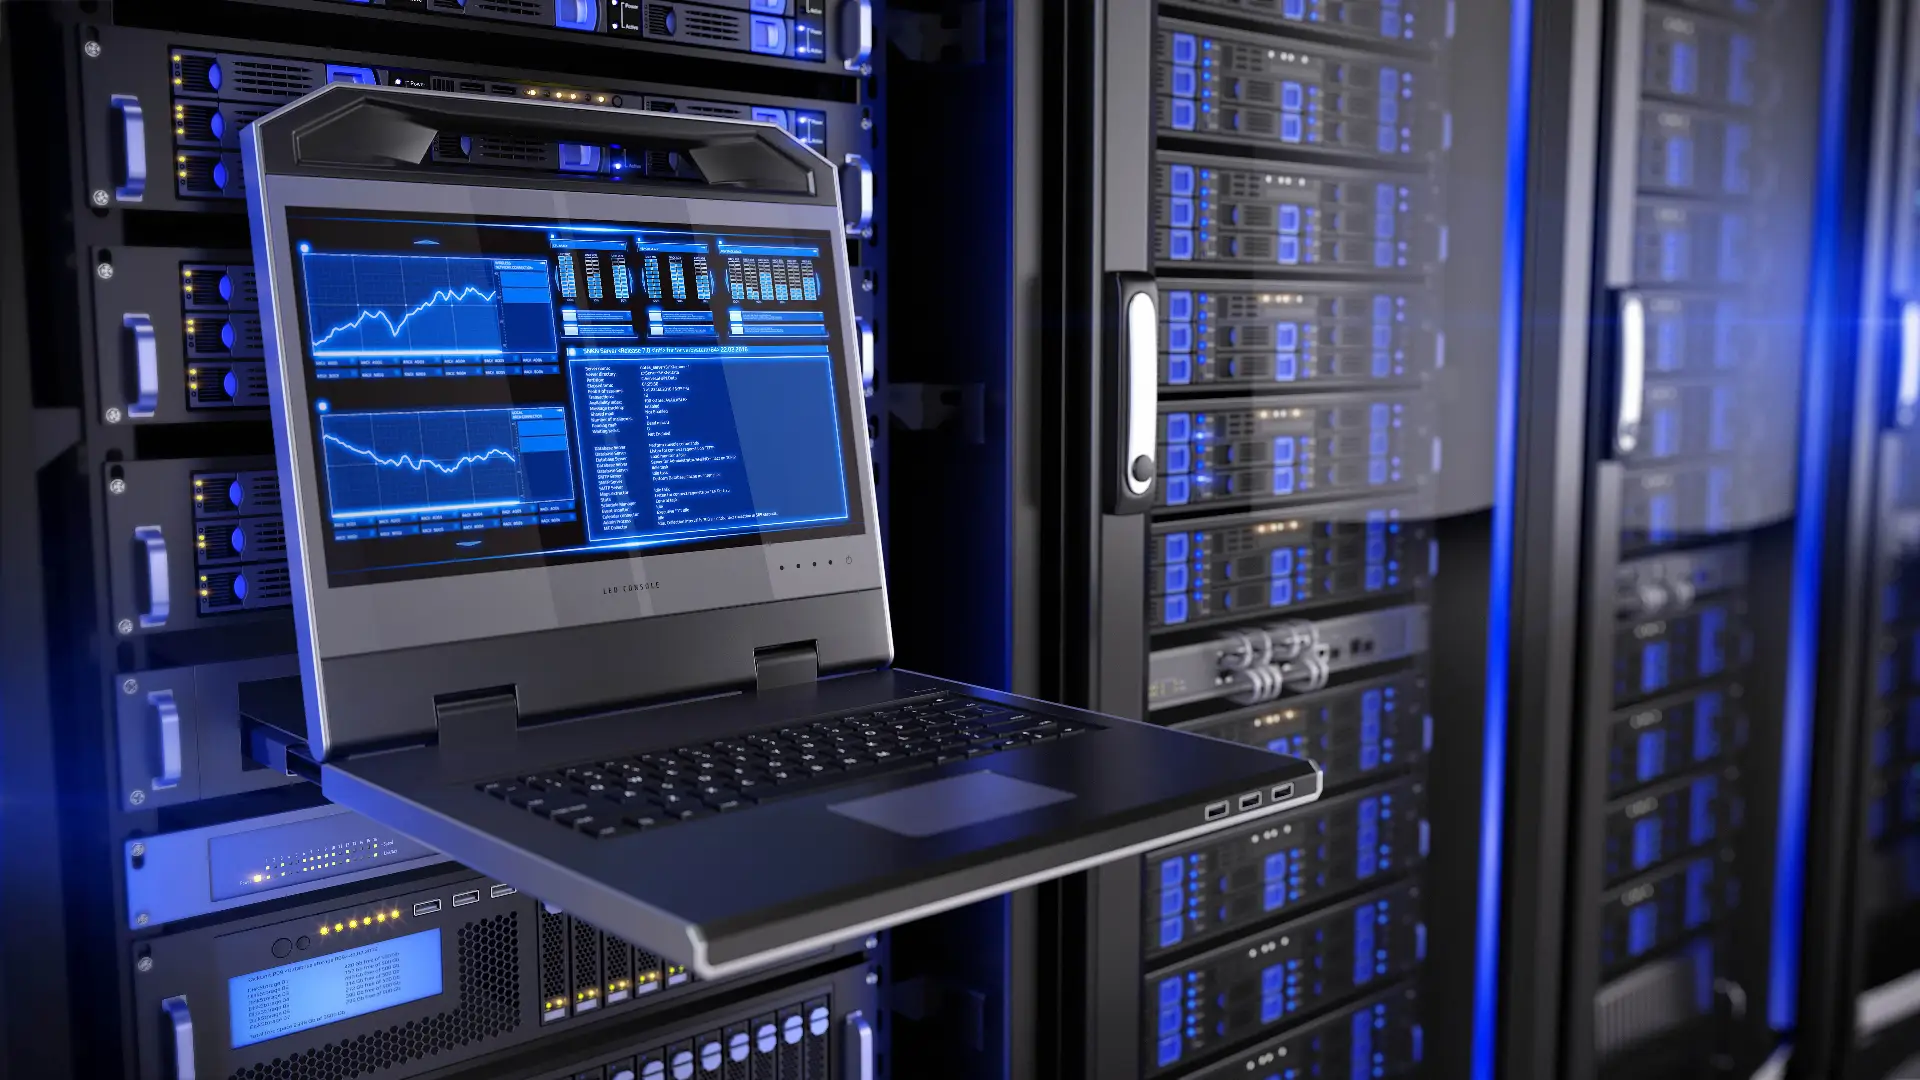 OPTIMAL STORAGE SOLUTIONS FOR DATA CENTERS